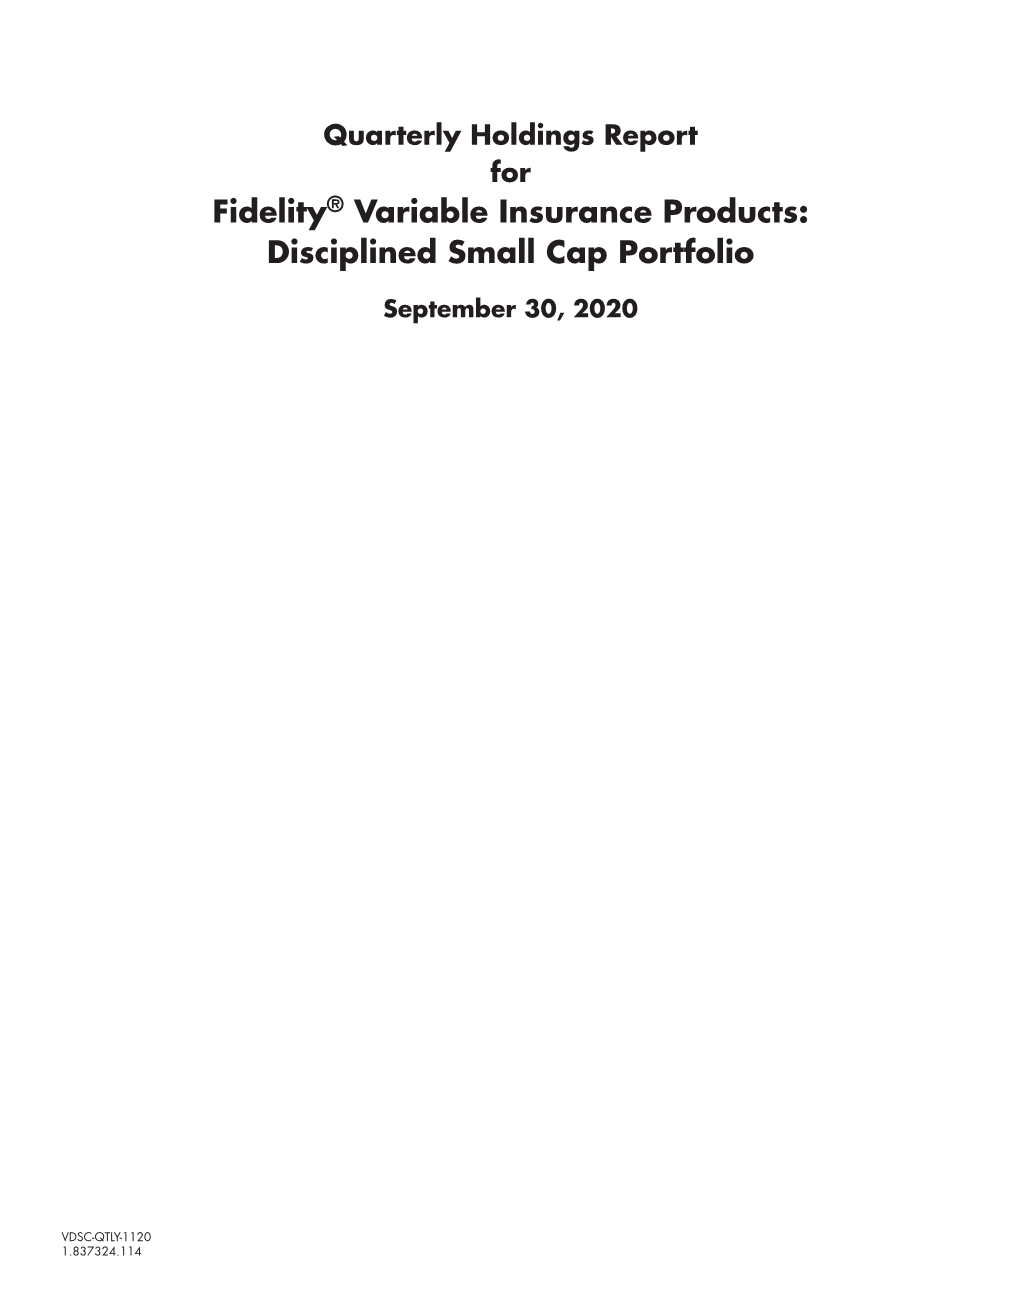 Fidelity® Variable Insurance Products: Disciplined Small Cap Portfolio